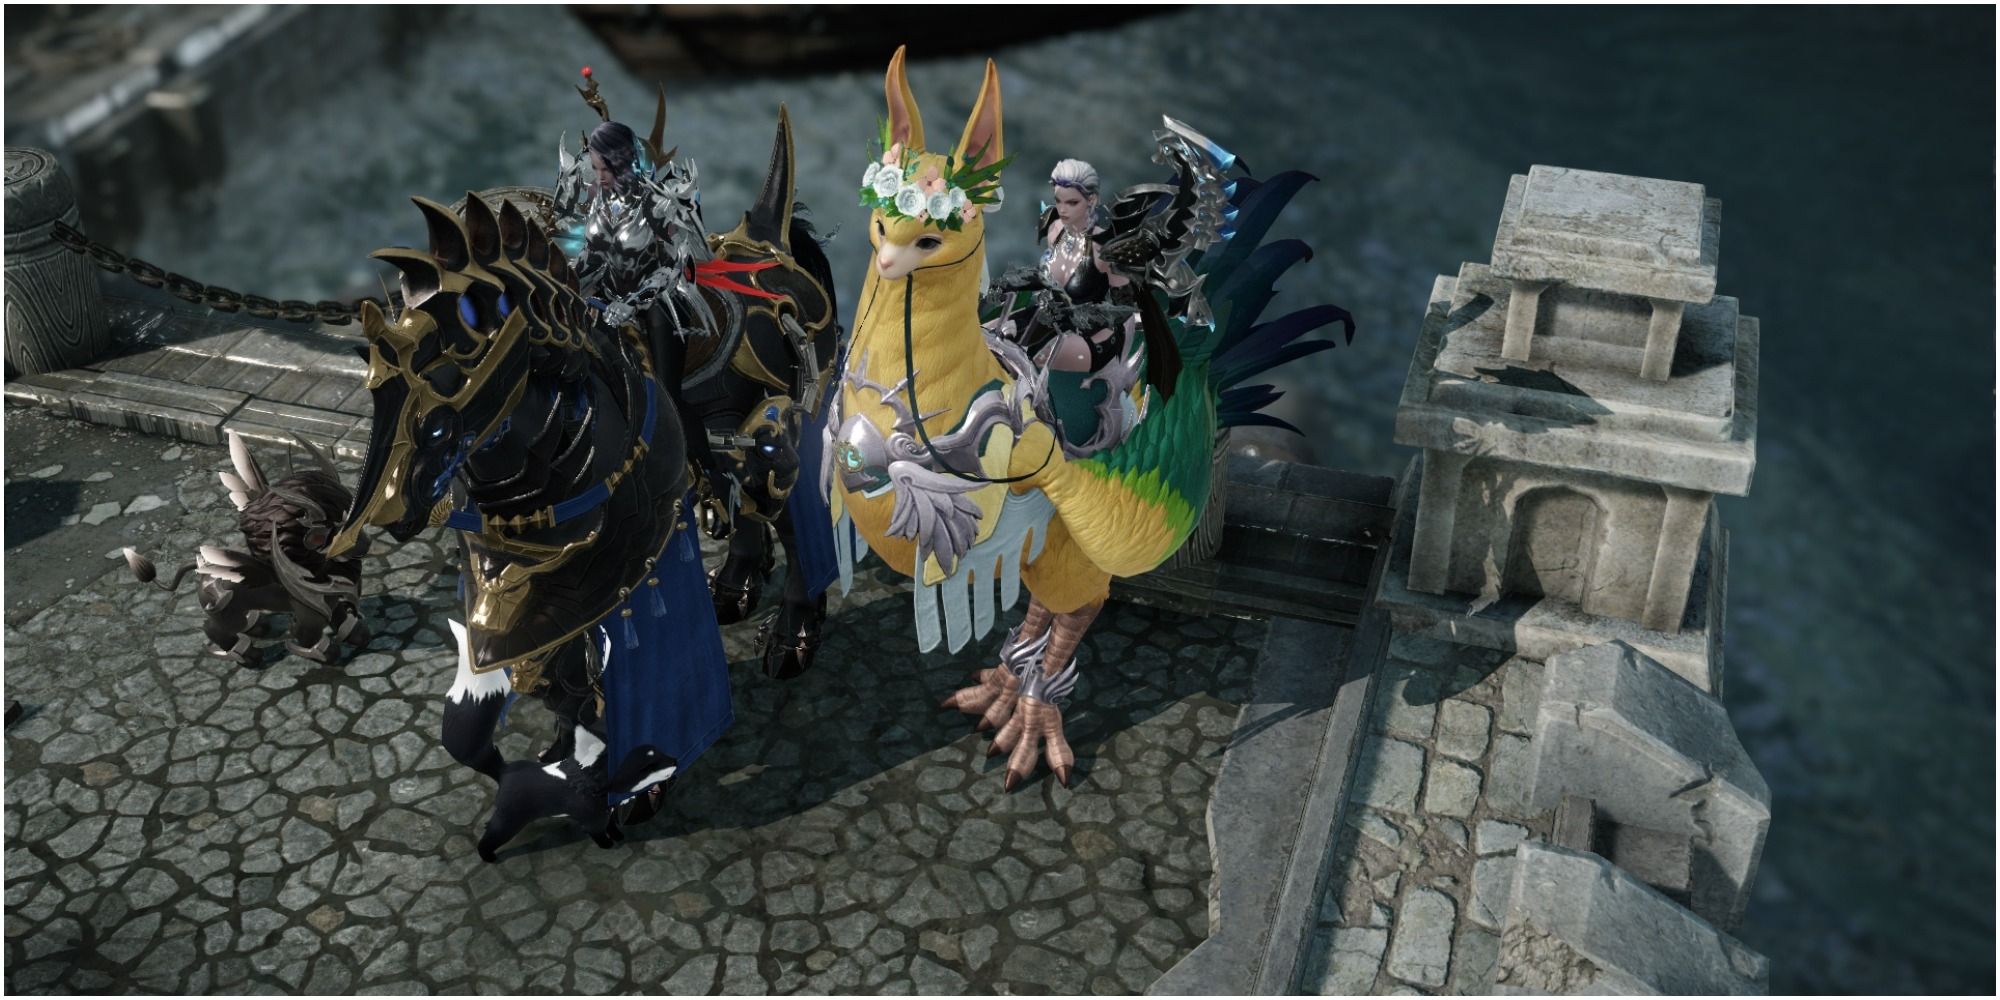 Lost Ark player posing on chocobo-looking mount with friend on armored horse mount